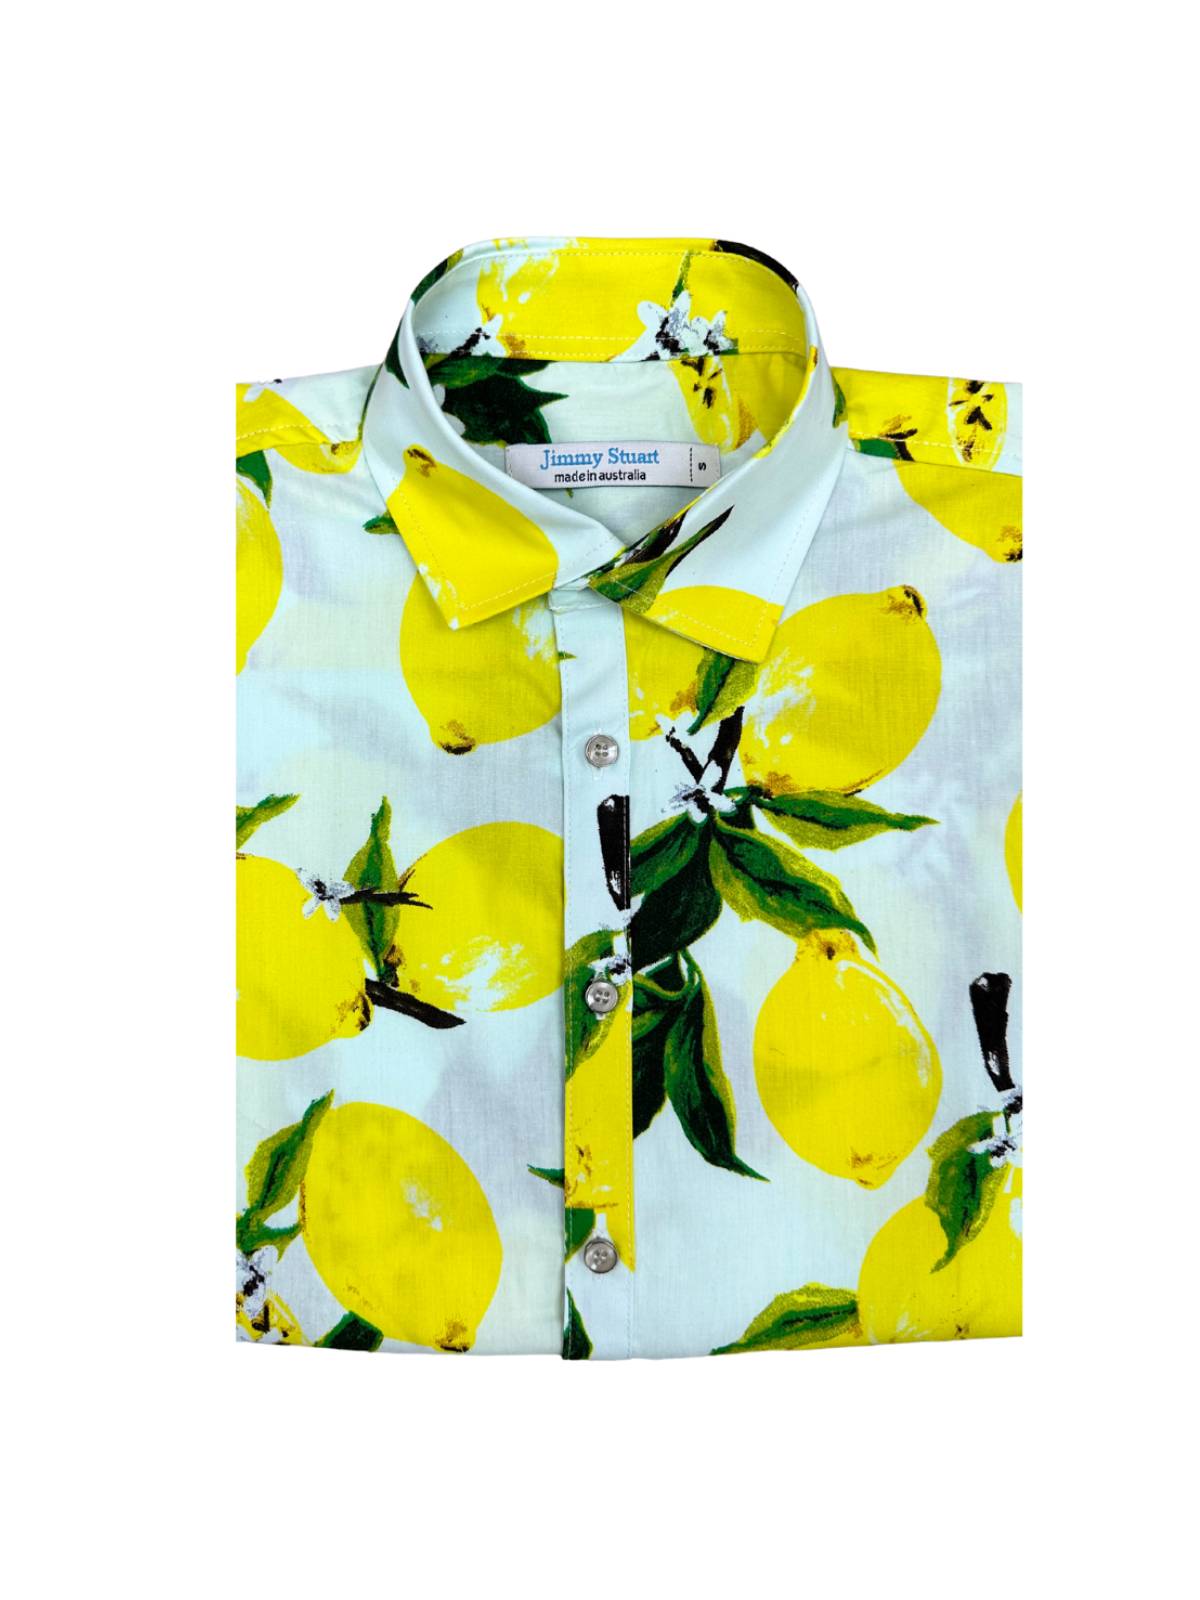 Zesty Floral Cotton S/S Shirt - Yellow/Green